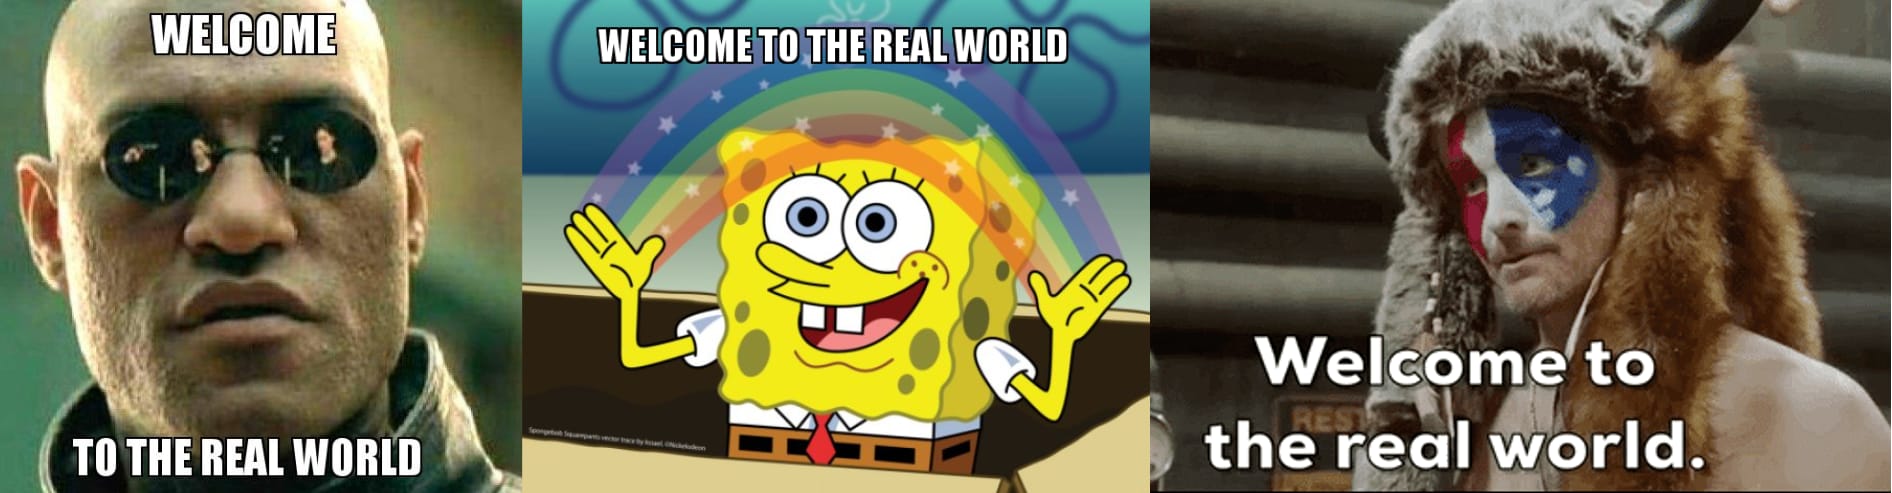 Three memes of the saying "Welcome to the real world" popularised by the movie Matrix